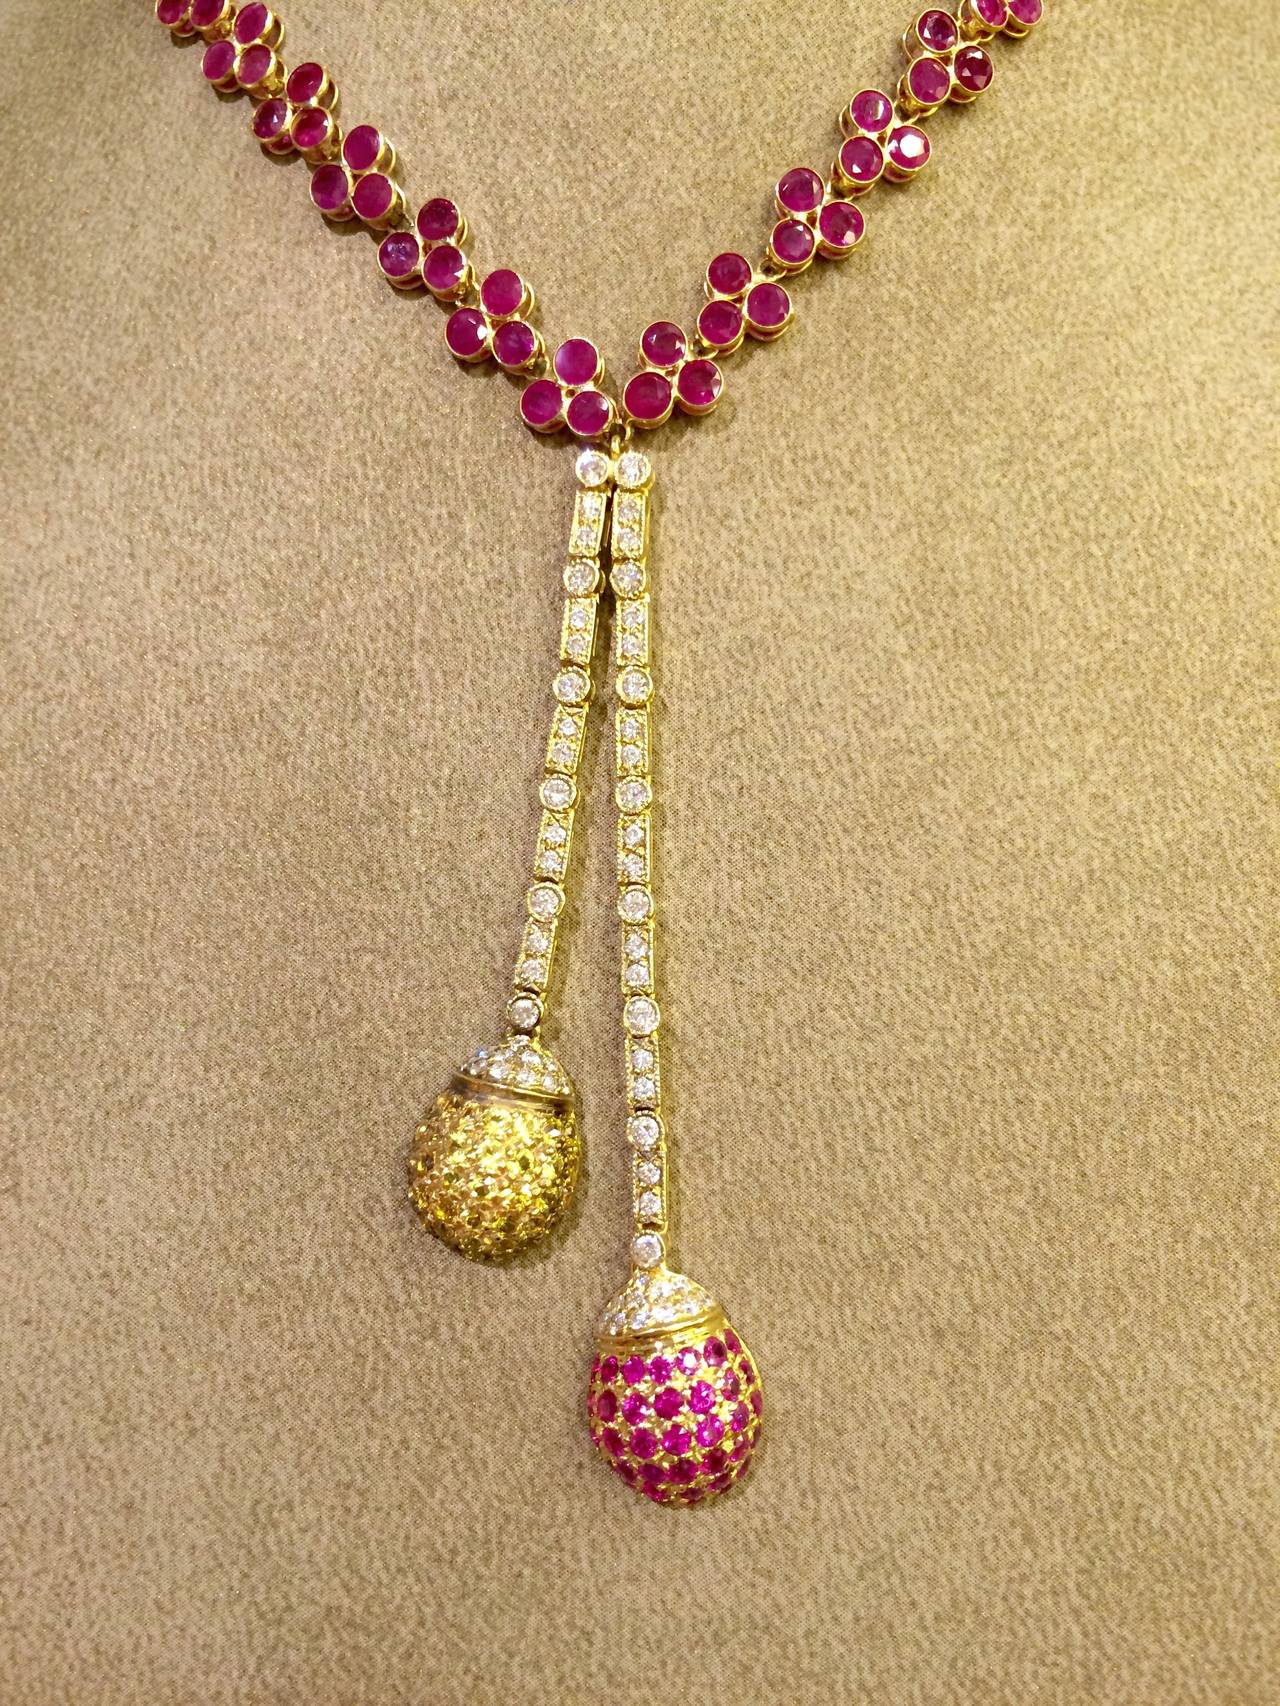 18k and 14k Gold Necklace with Bezel set Rubies and Diamonds. Pave set with Pink and Yellow Sapphires.